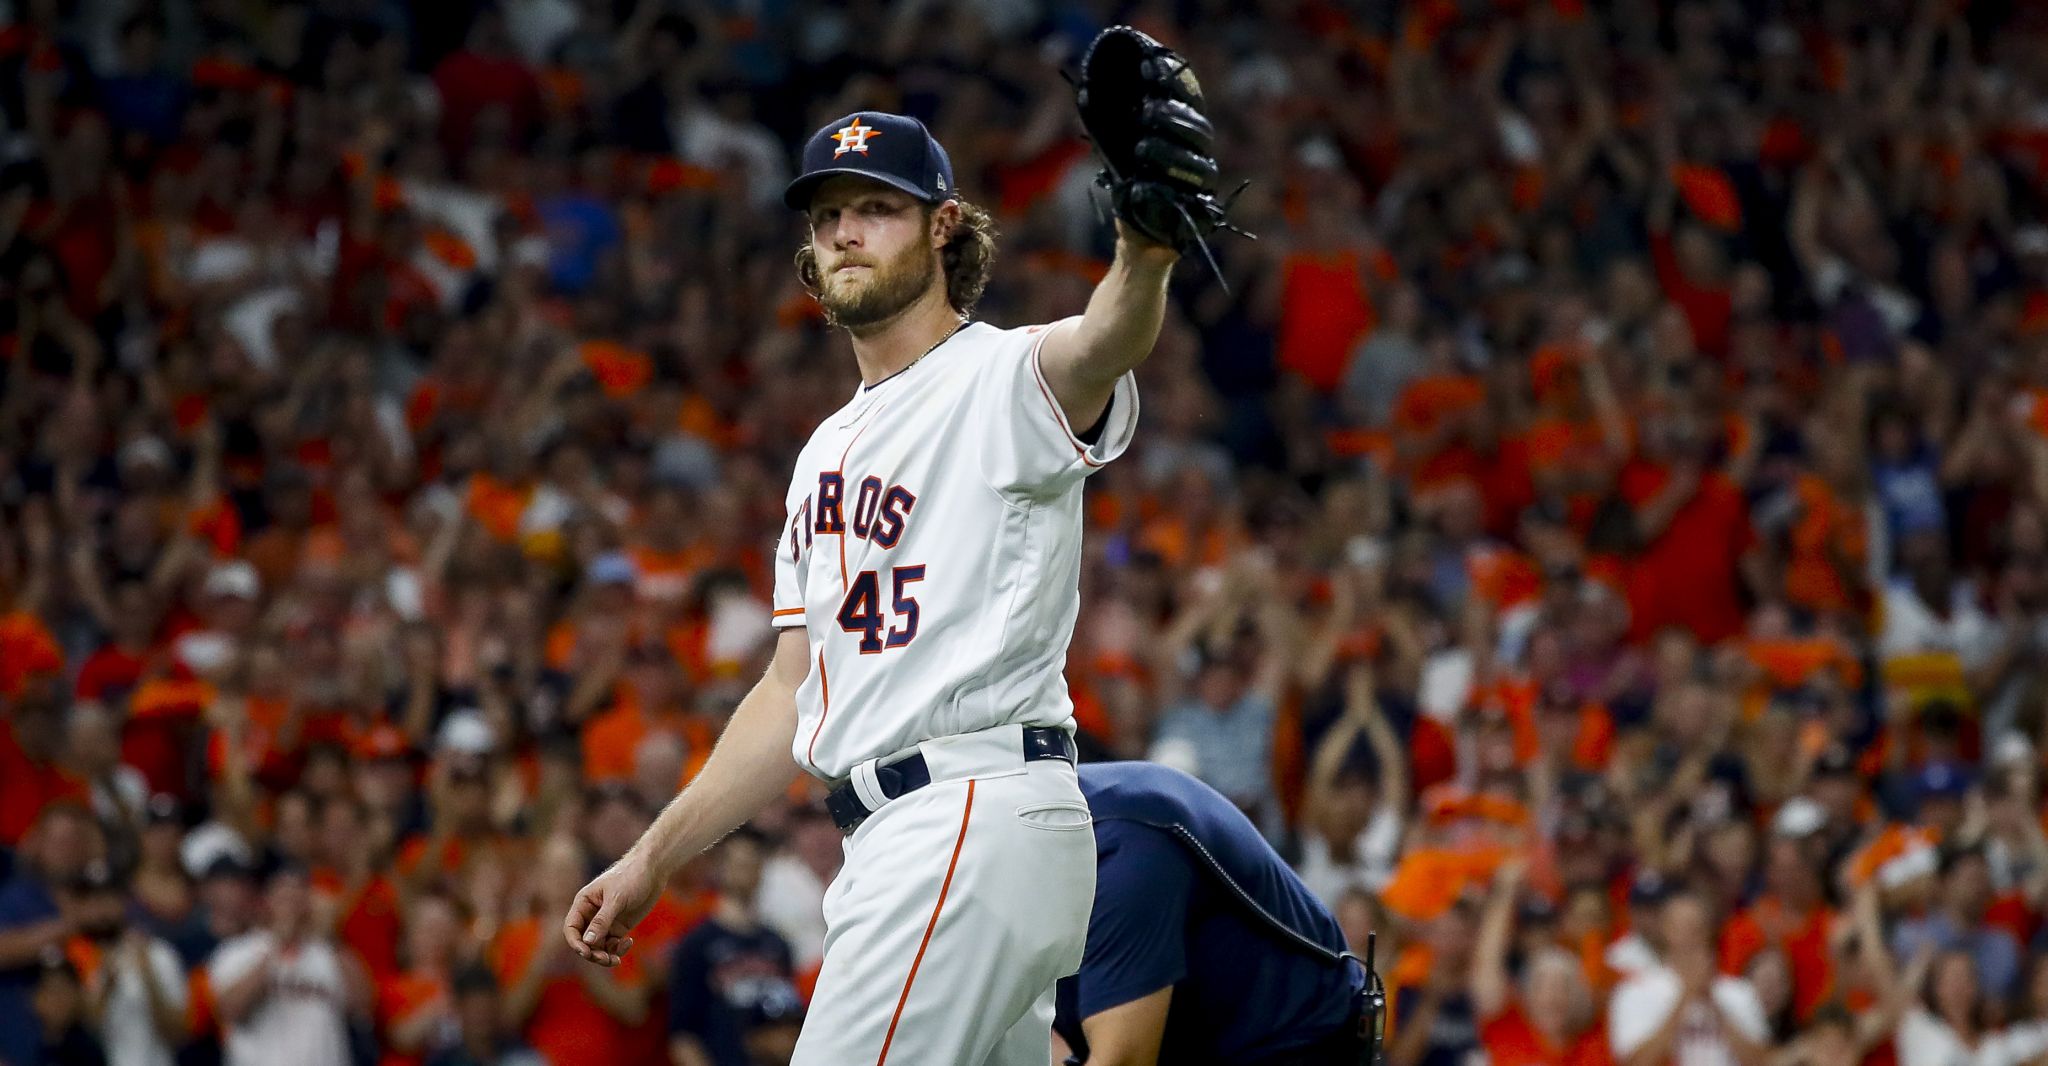 Smith: Astros cold now, but April isn't time to draw firm conclusions